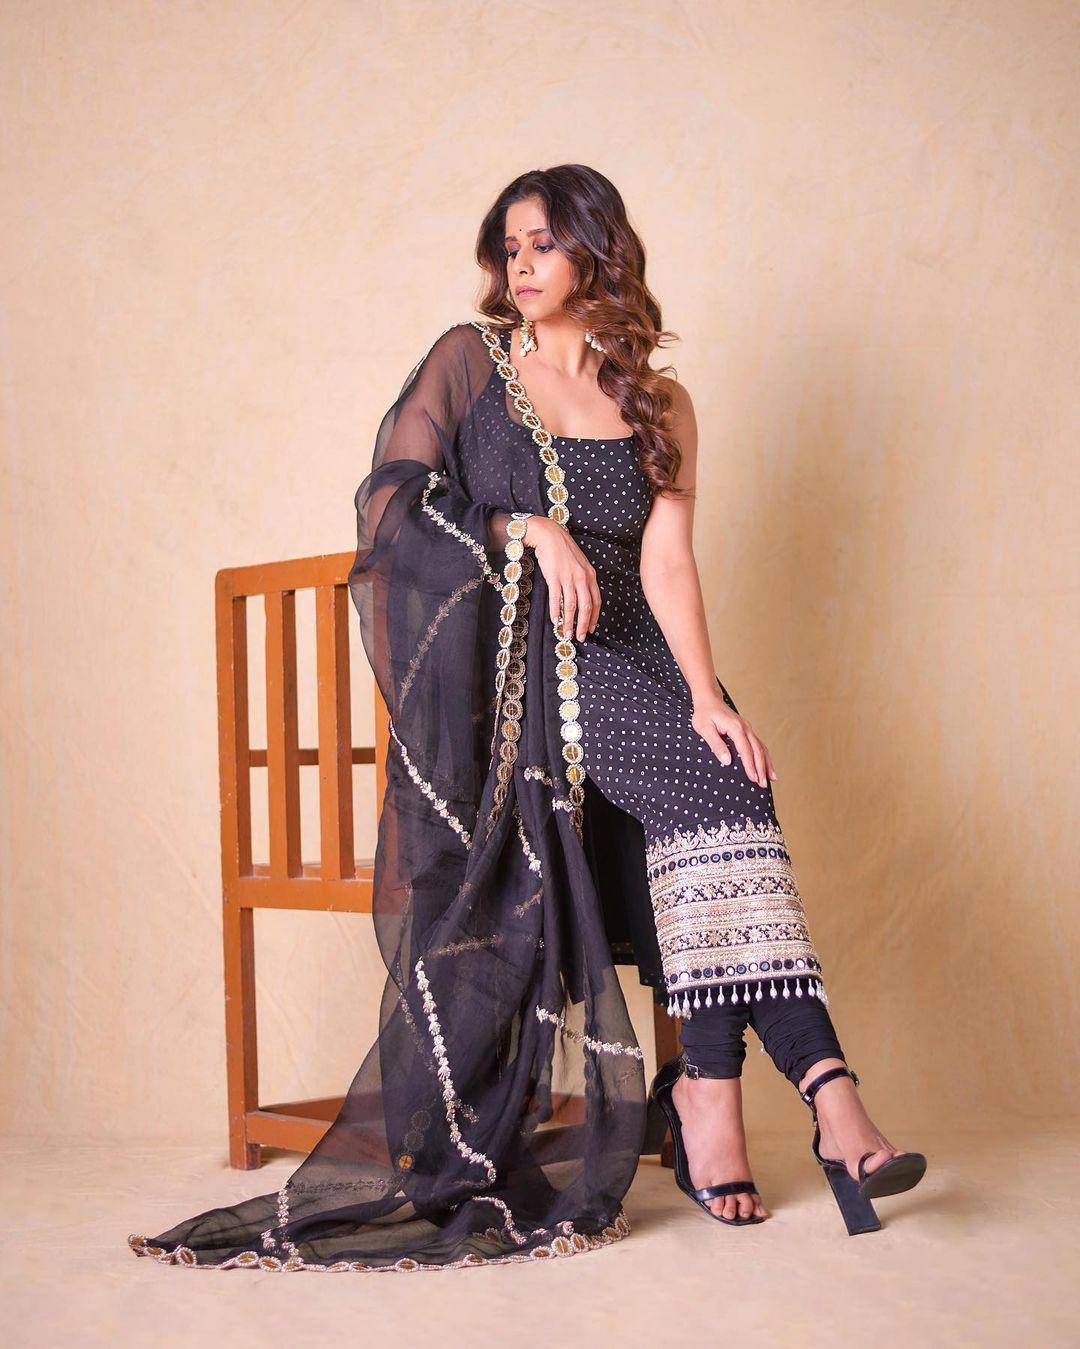 The strappy black kurta featured intricate embroidery, paired seamlessly with a sheer dupatta adorned with a golden border